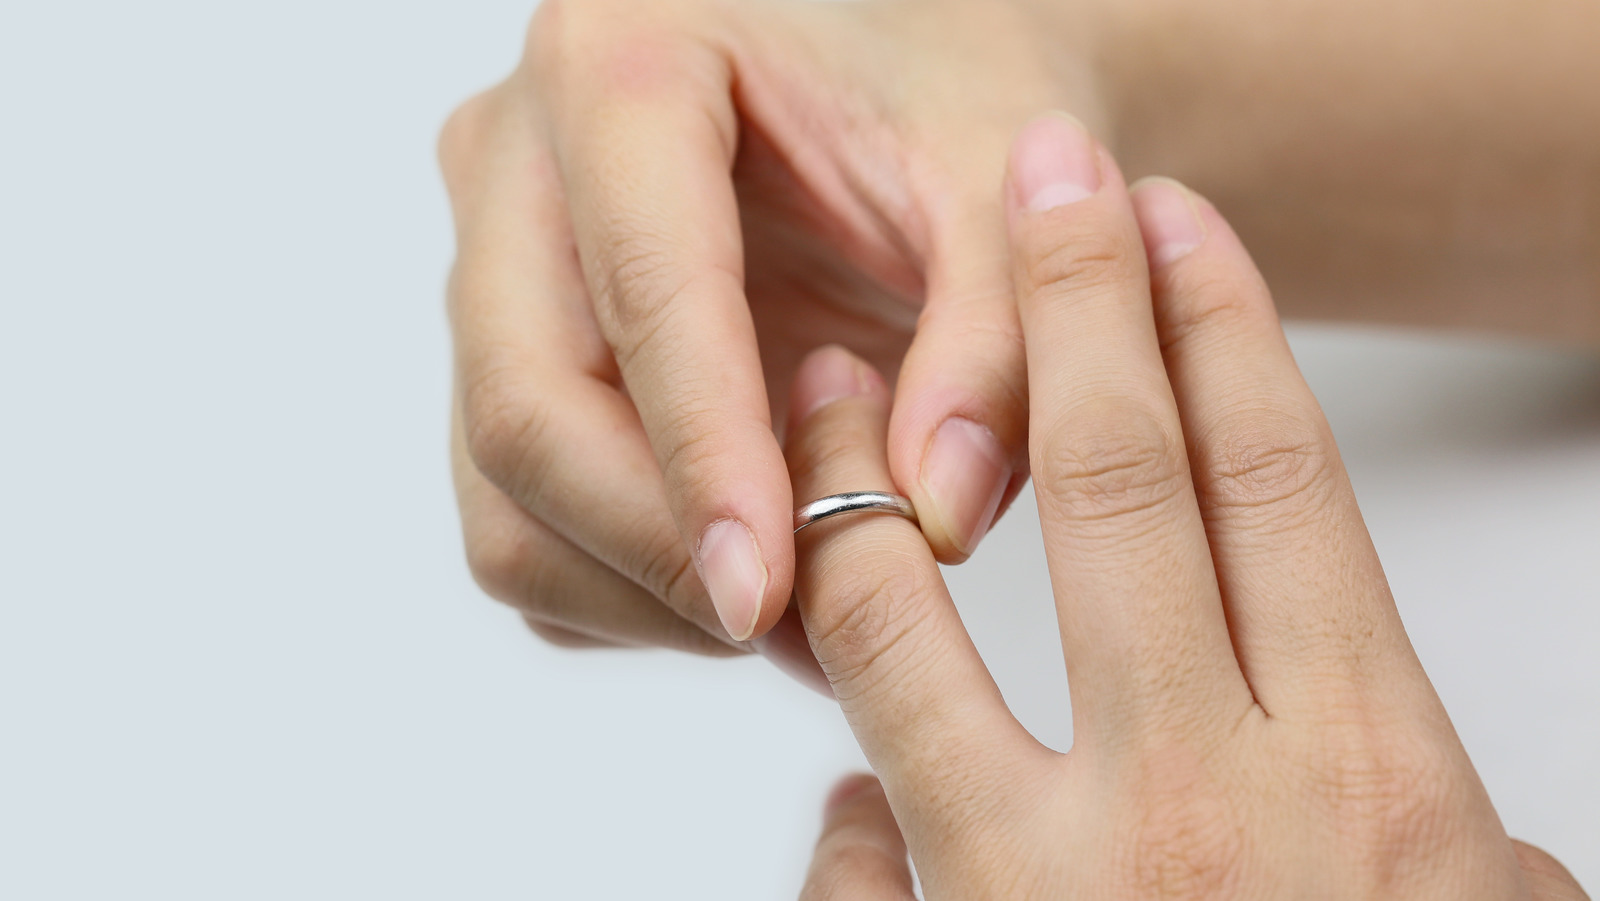 Tips on how to remove a ring when you're pregnant.